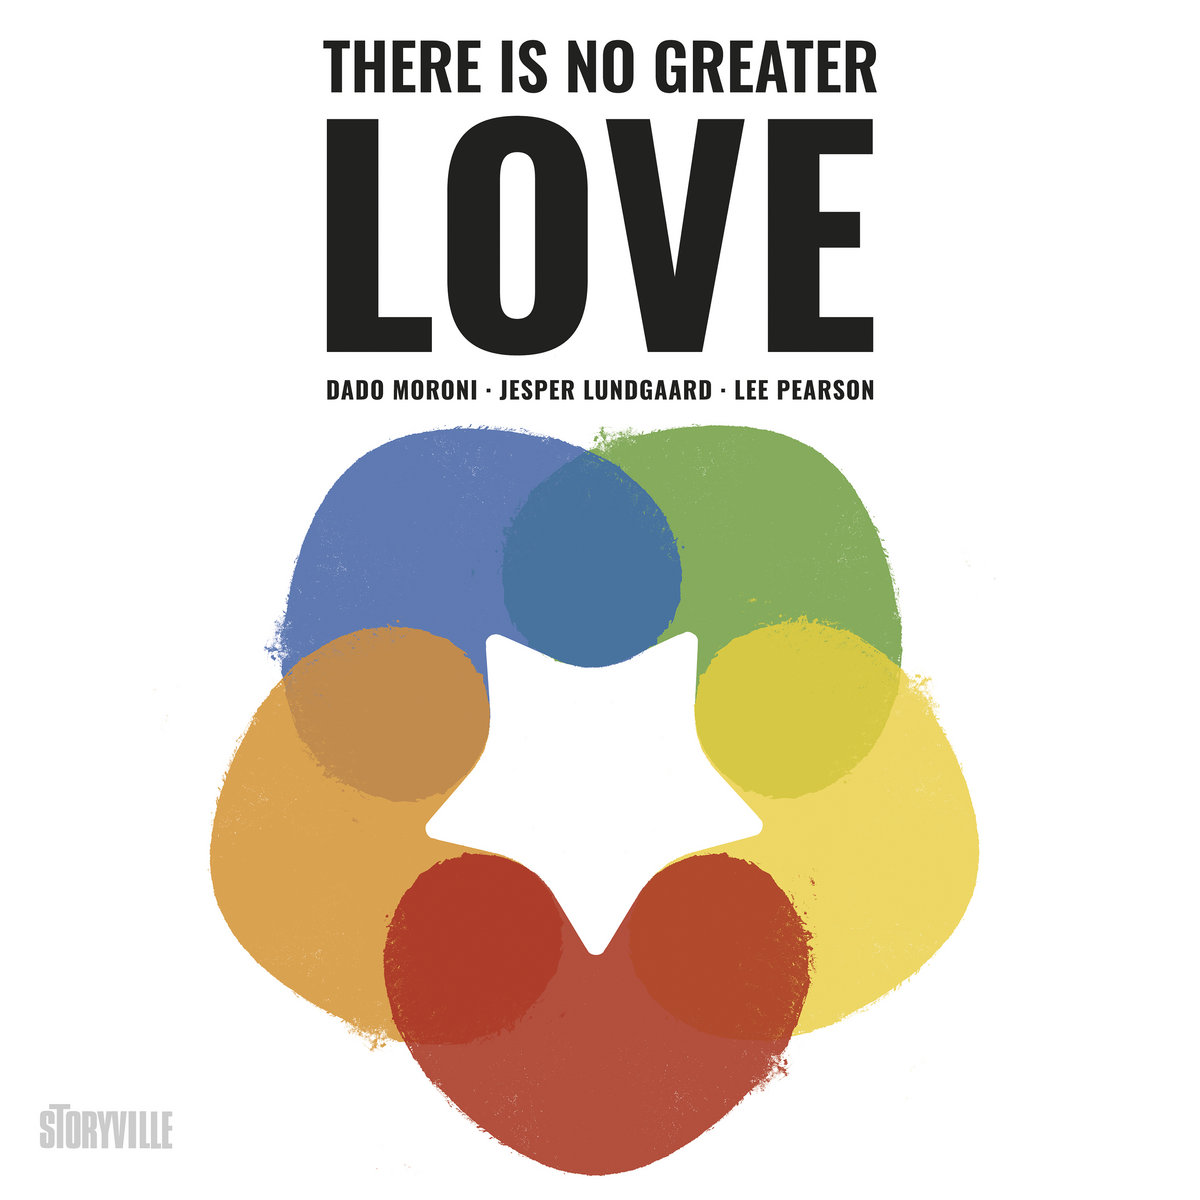 Dado Moroni・Jesper Lundgaard・Lee Pearson / There Is No Greater Love